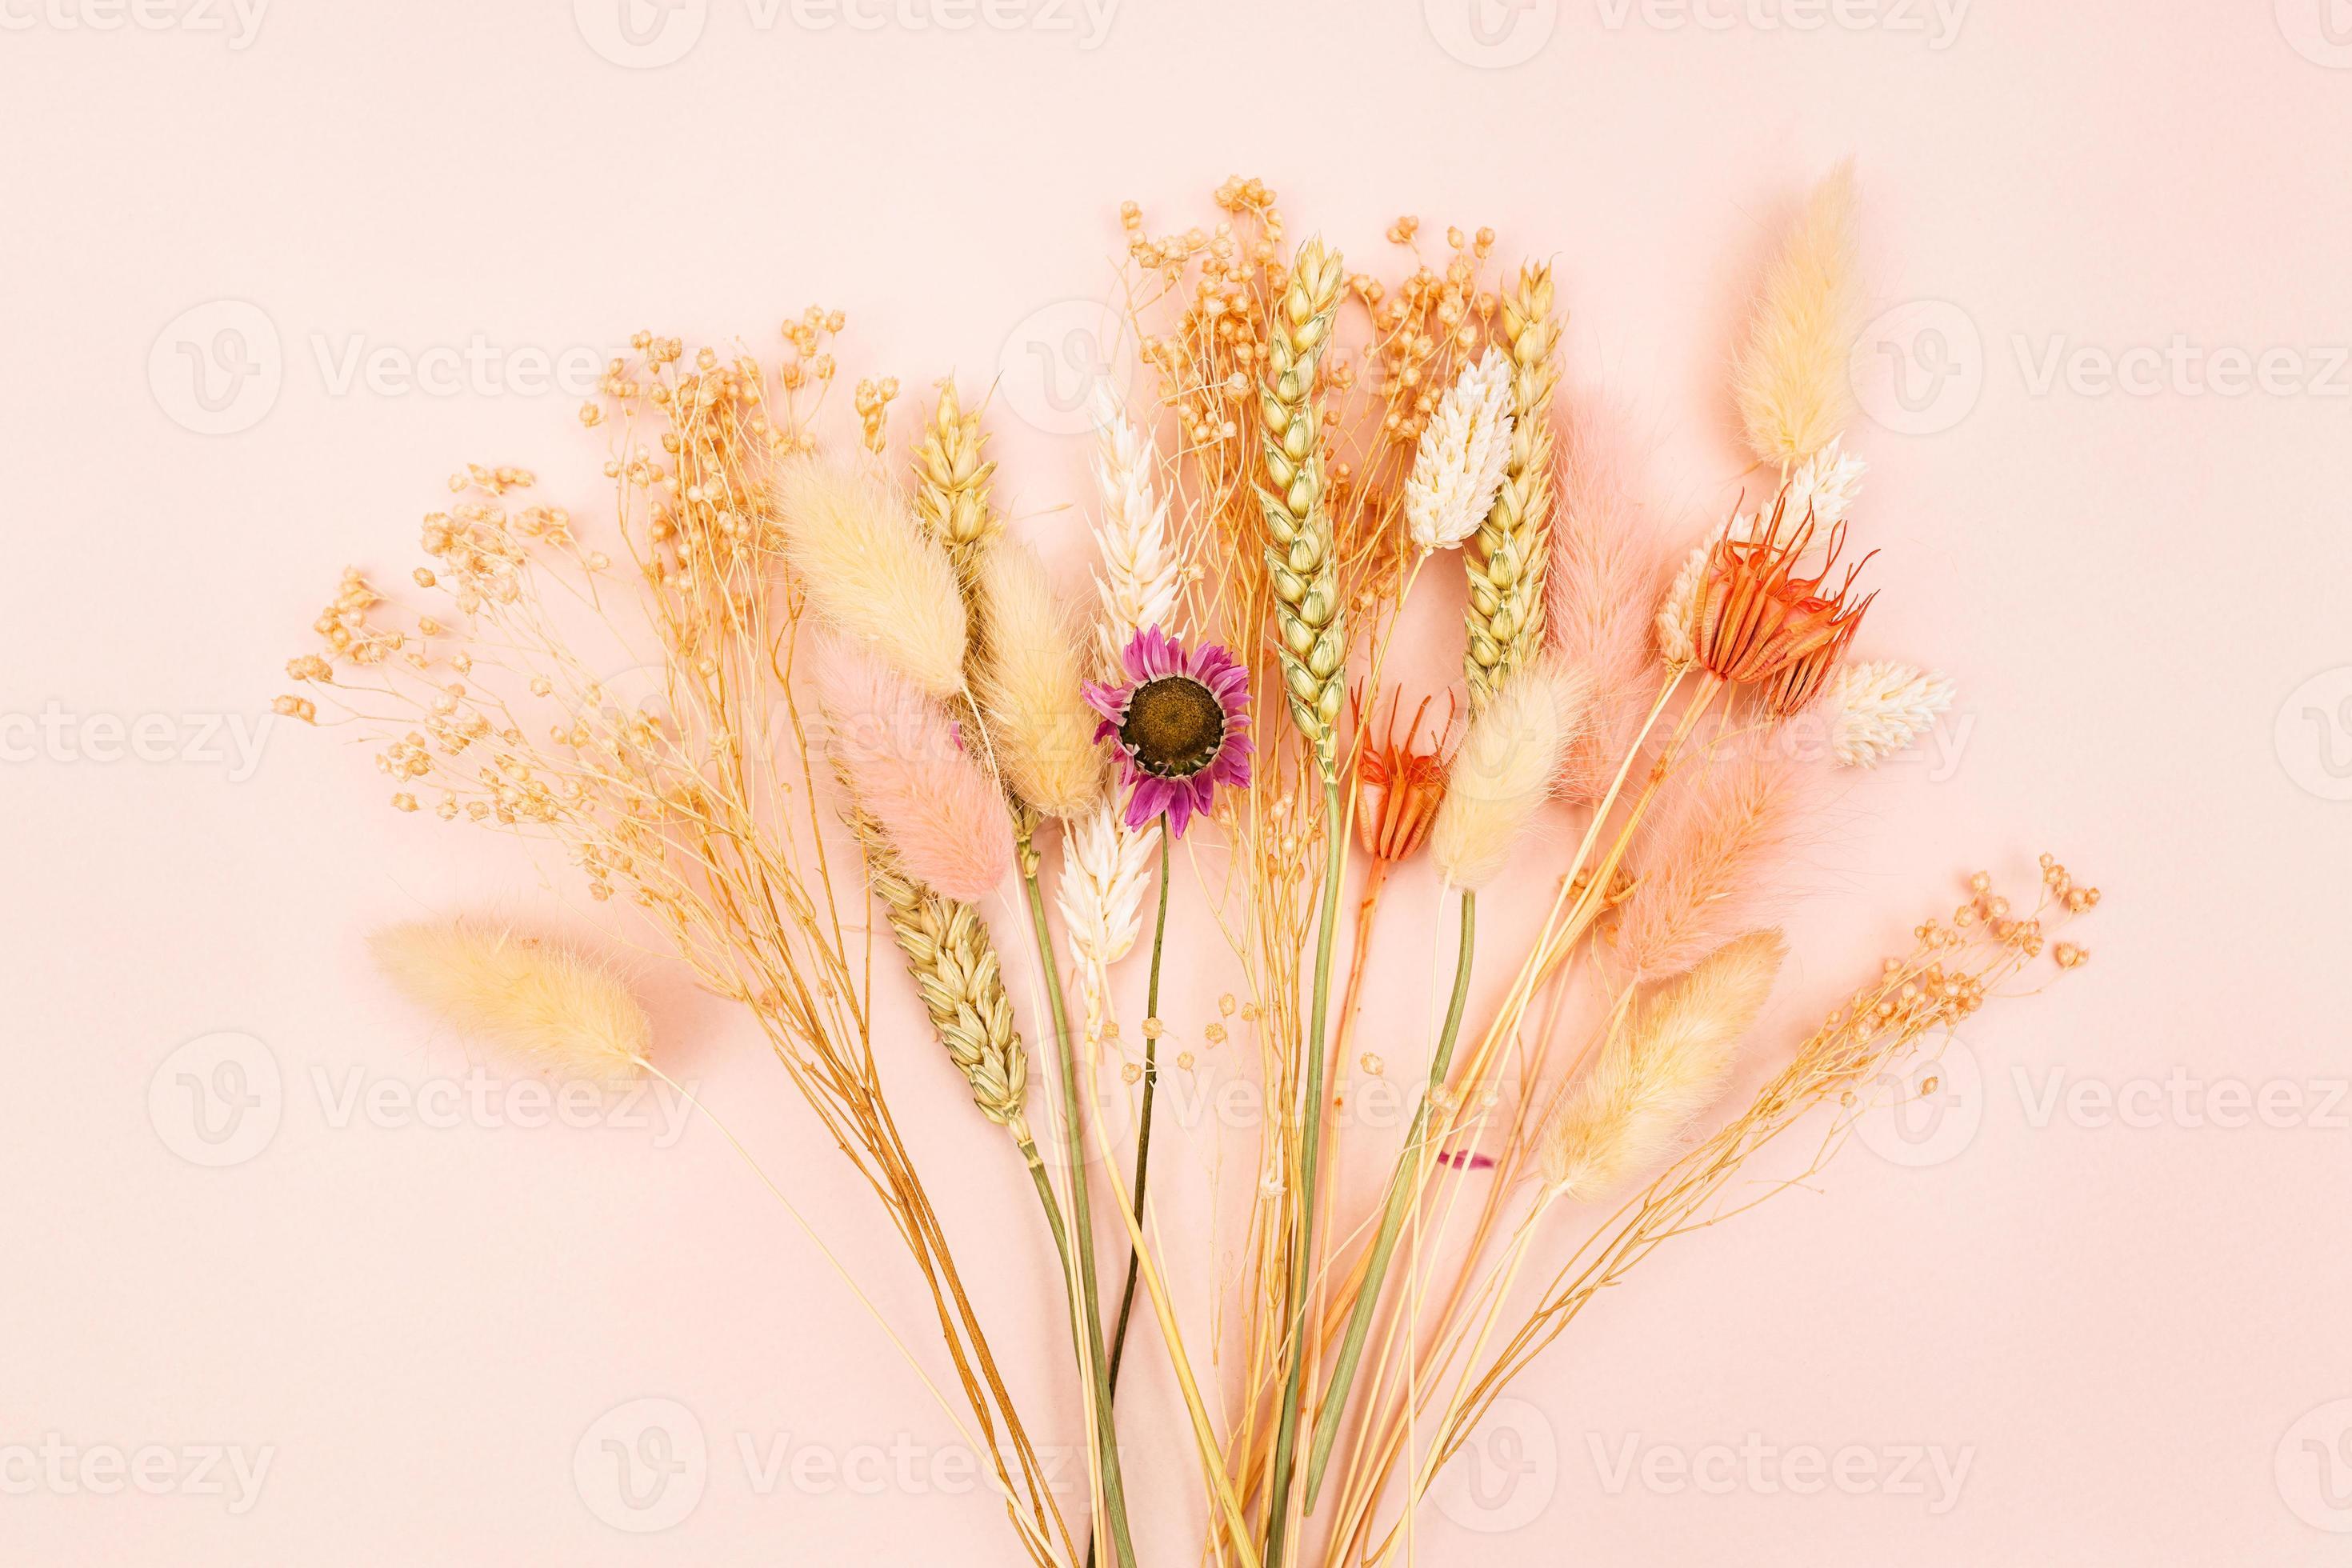 dried plants on pink pastel background close up 18793678 Stock